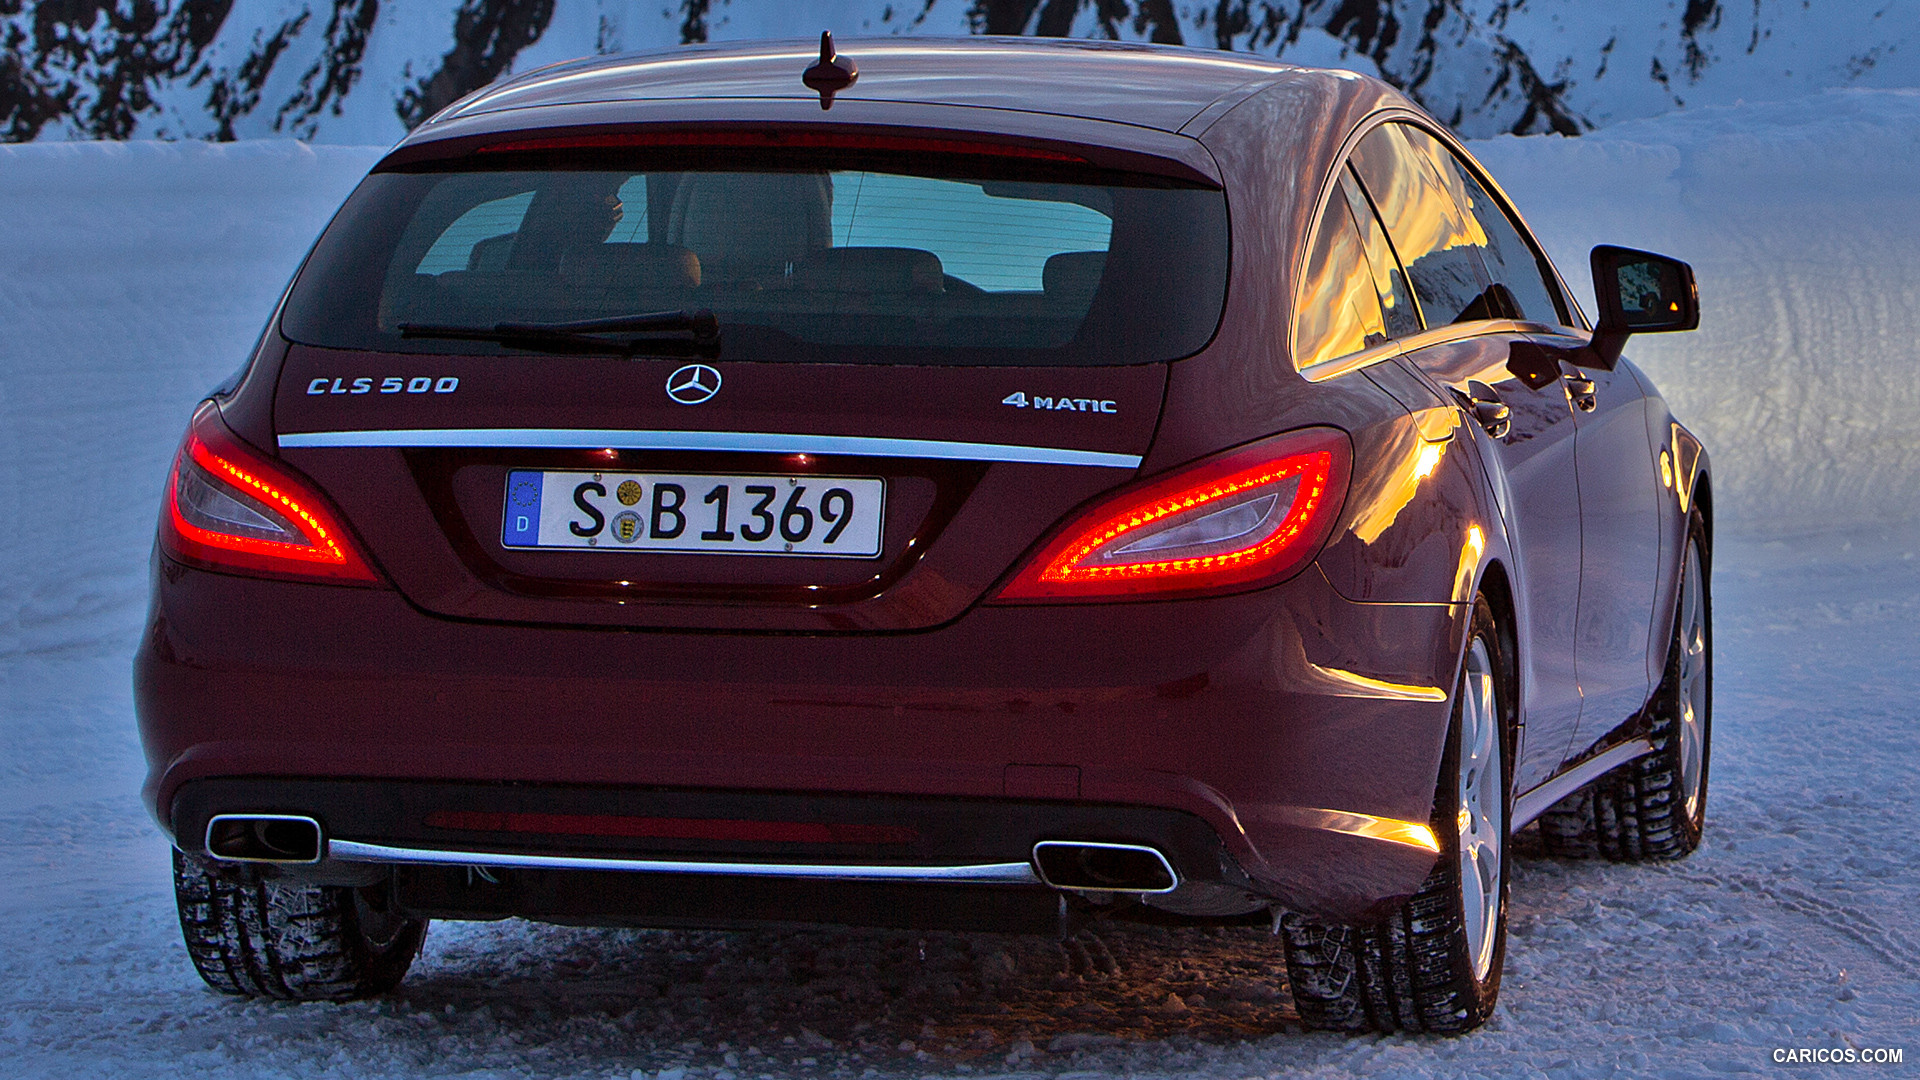 2013 Mercedes-Benz CLS 500 4MATIC Shooting Brake on Snow - Rear, #159 of 184